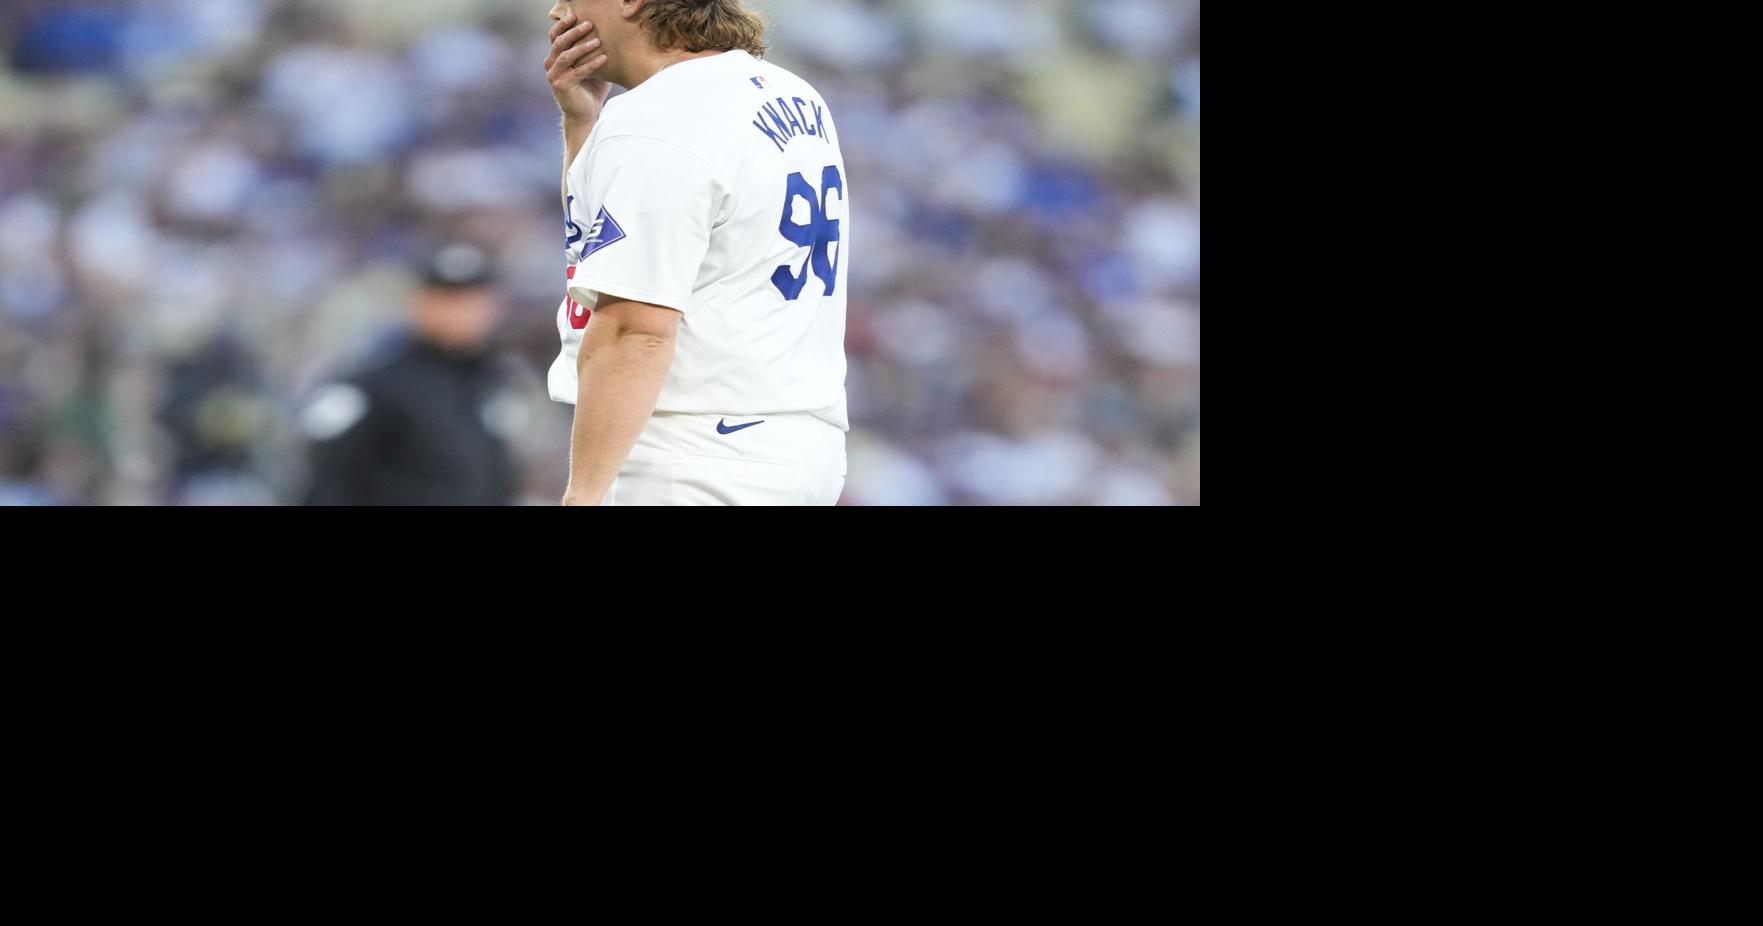 Landon Knack from Science Hill shines for the Dodgers, pitching five incredible scoreless innings against the Angels but ultimately receives no decision.